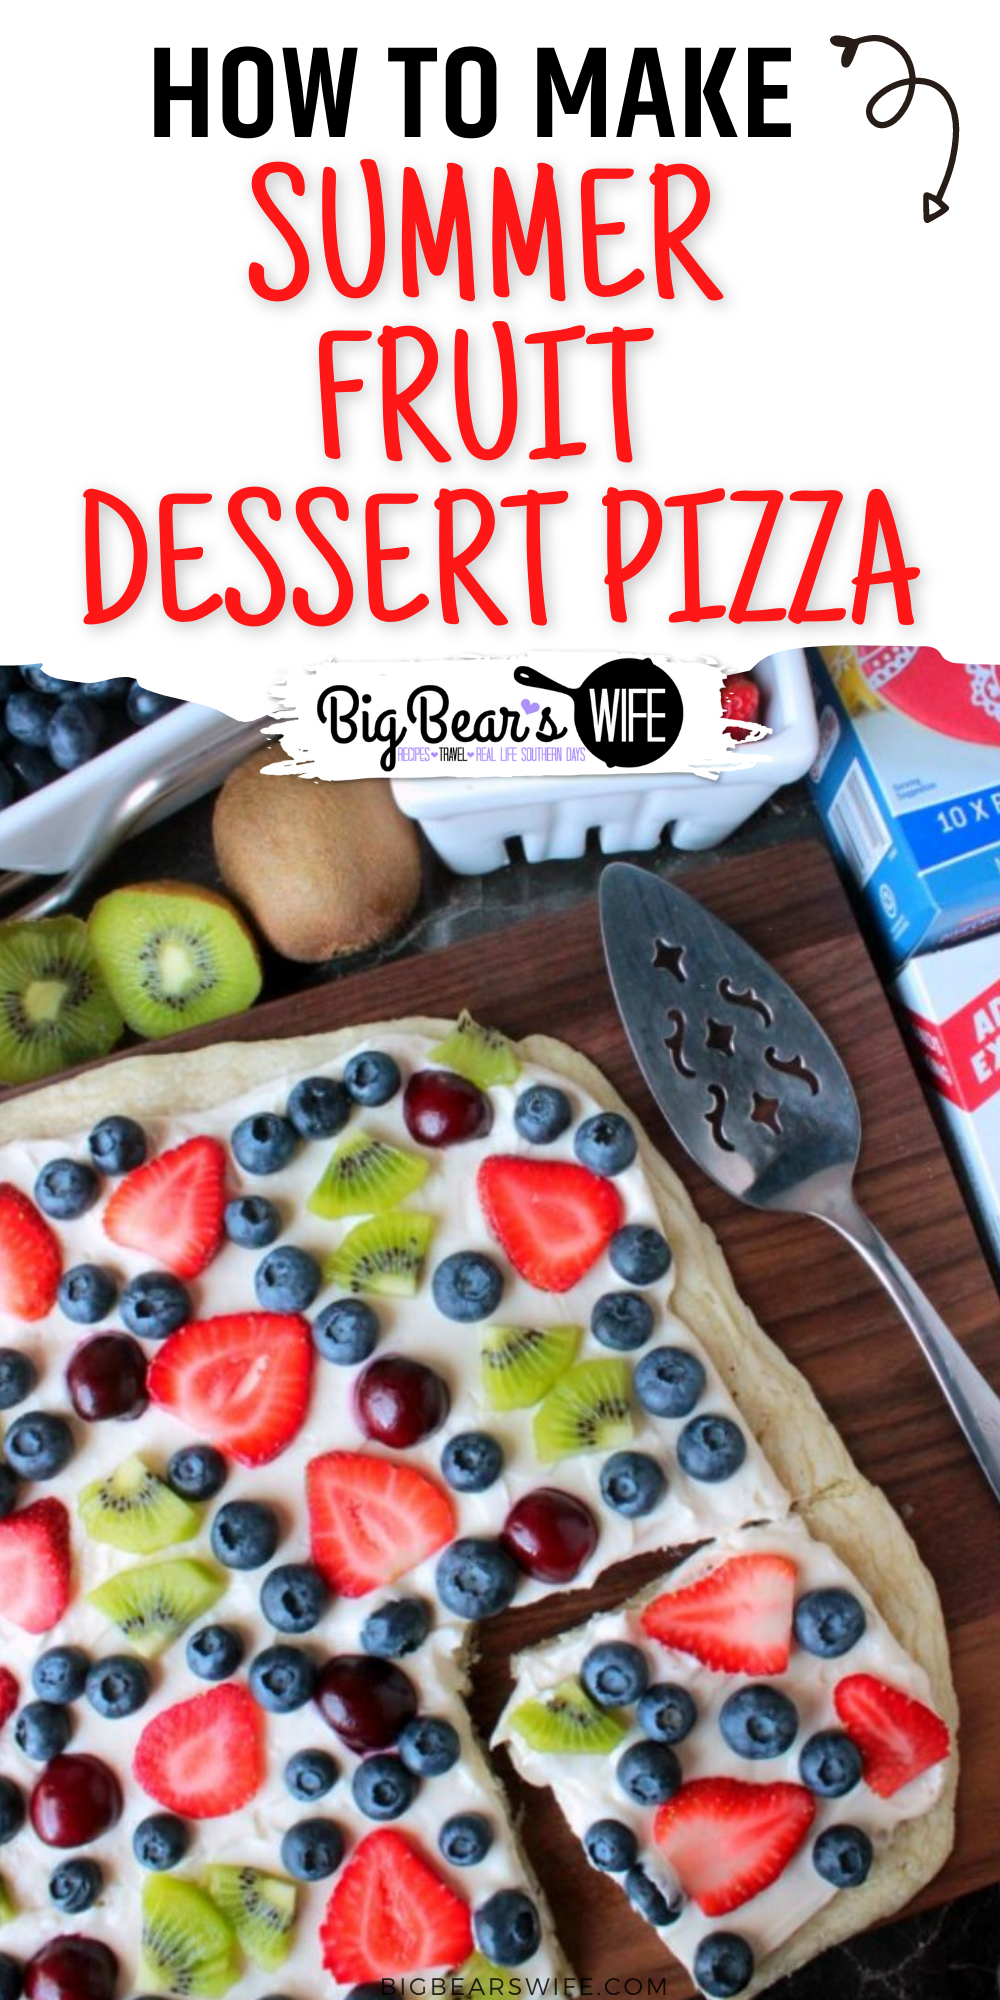 This Summer Fruit Dessert Pizza is a sweet sugar cookie "crust" with a marshmallow fluff cream cheese spread topped with slices of fresh fruit! via @bigbearswife